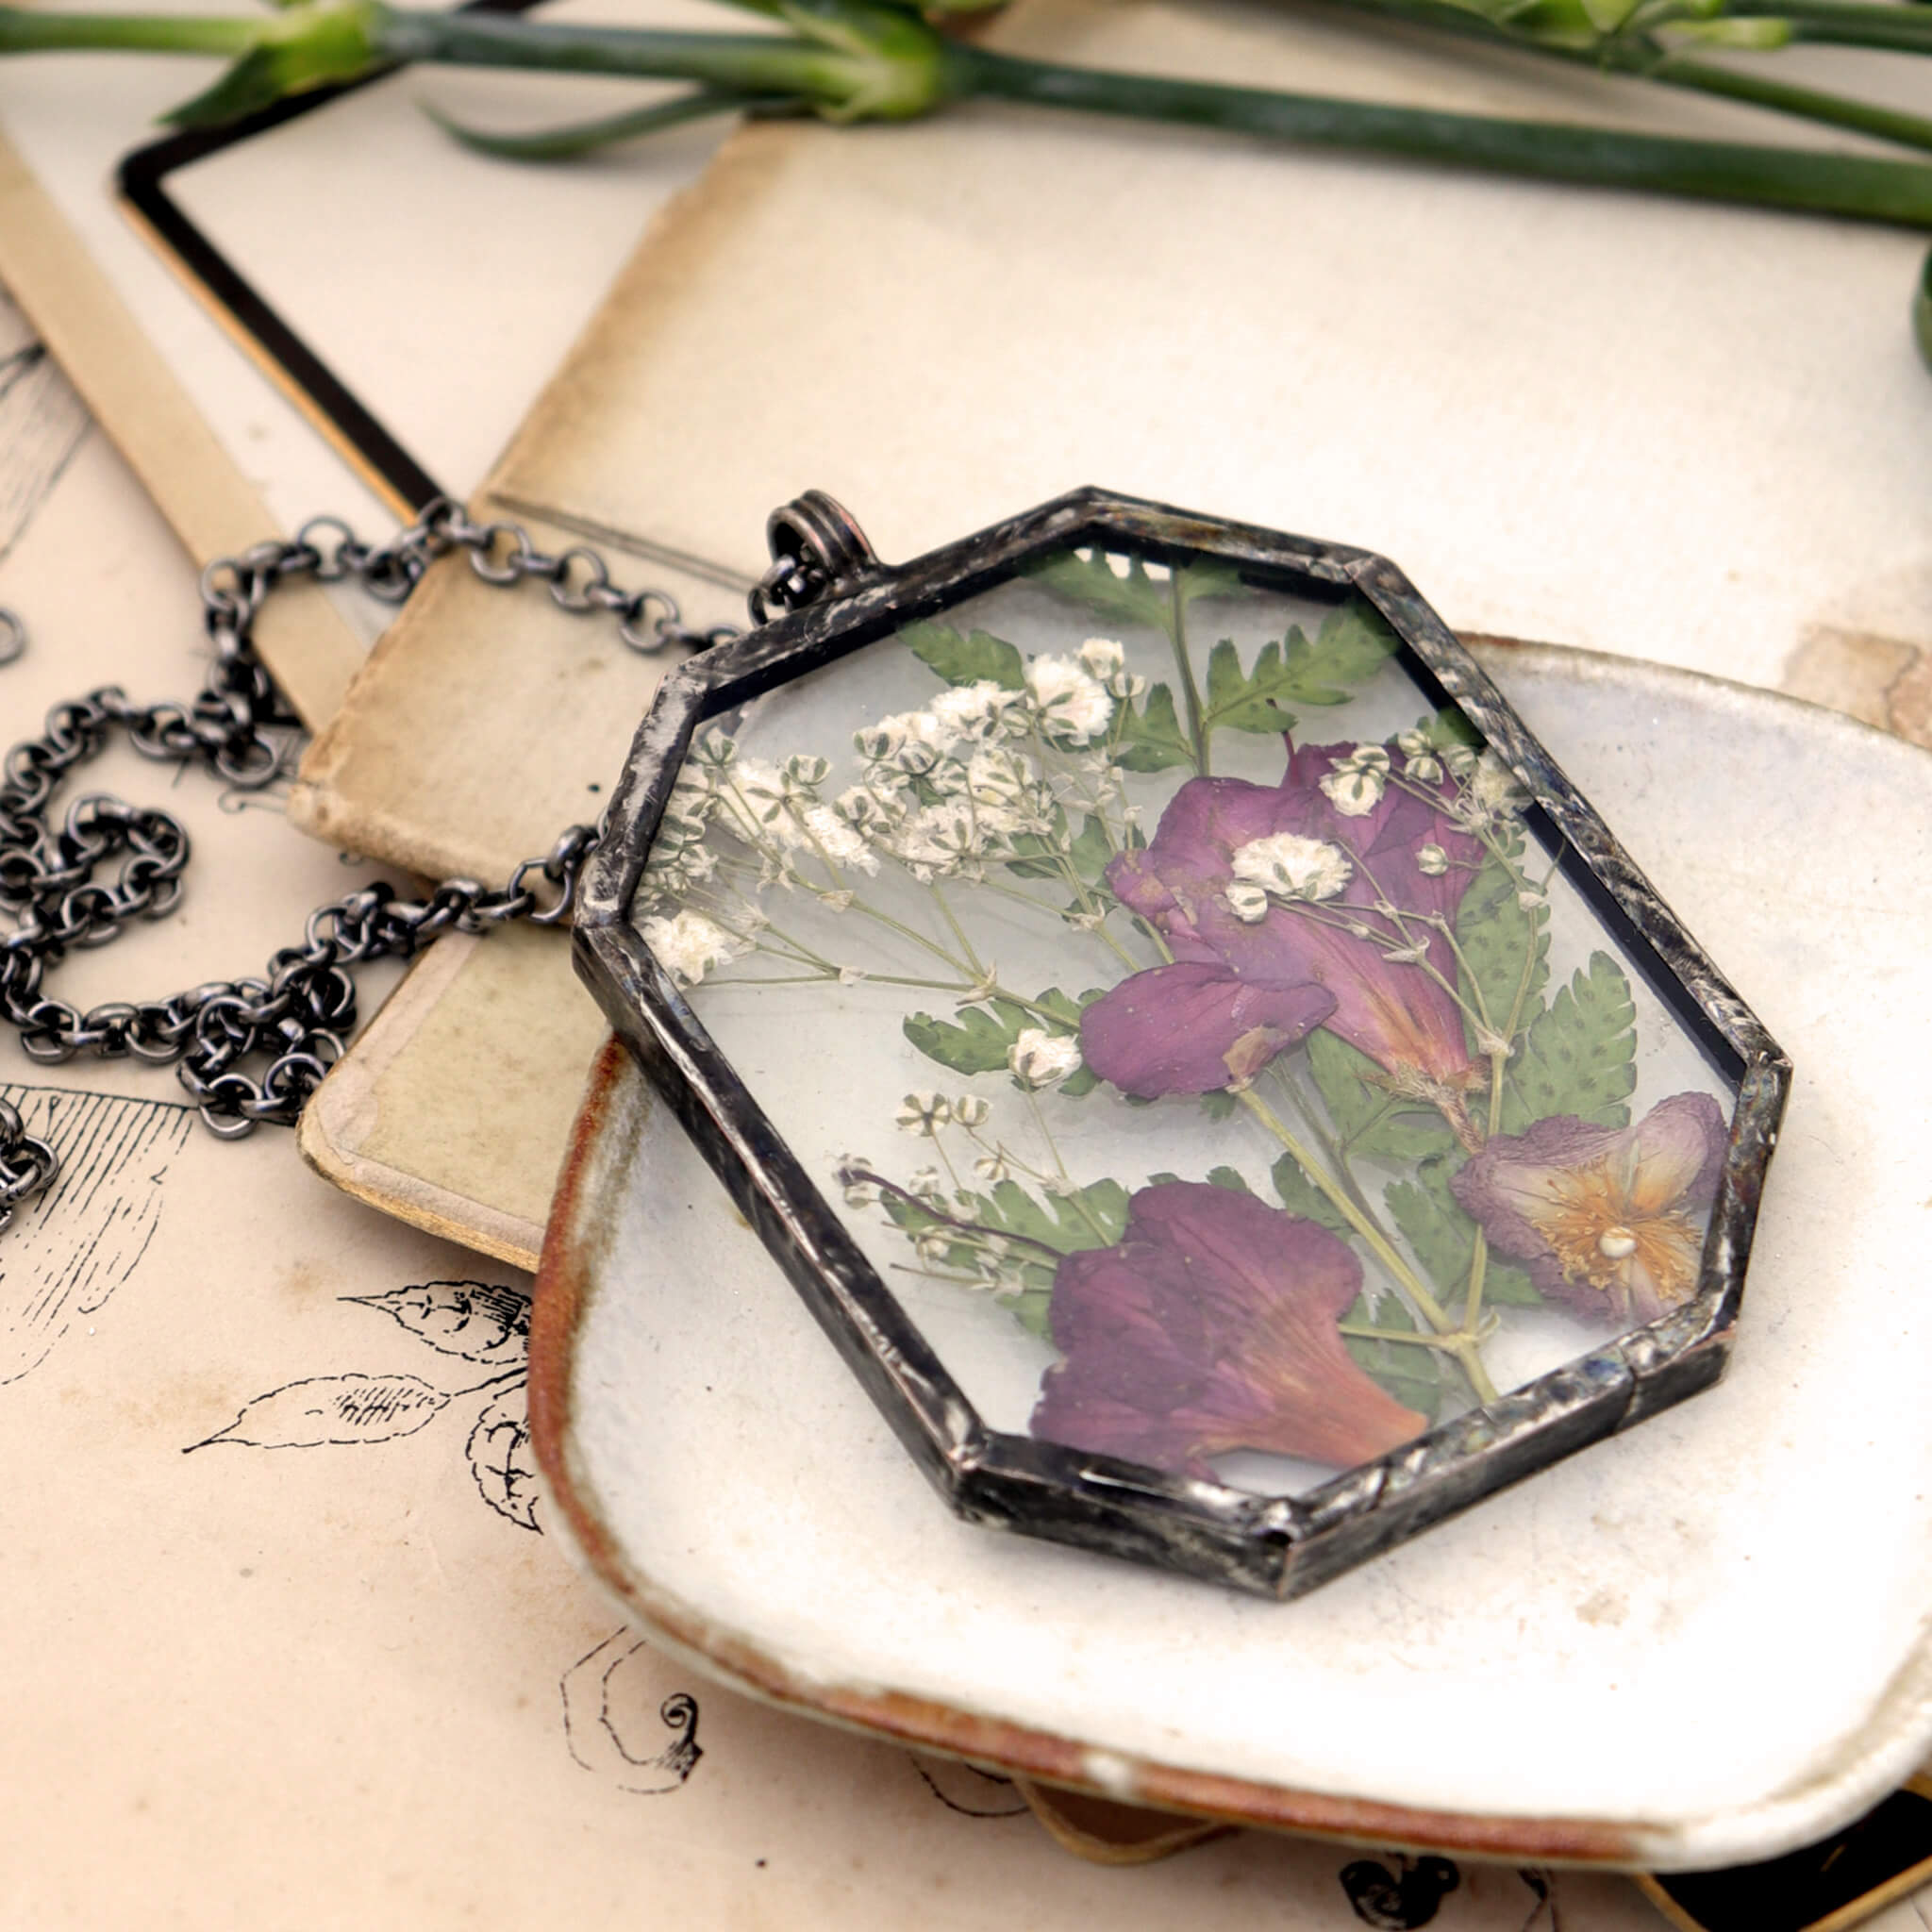 pink flowers and green ferns in glass and solder necklace lying on a white dish